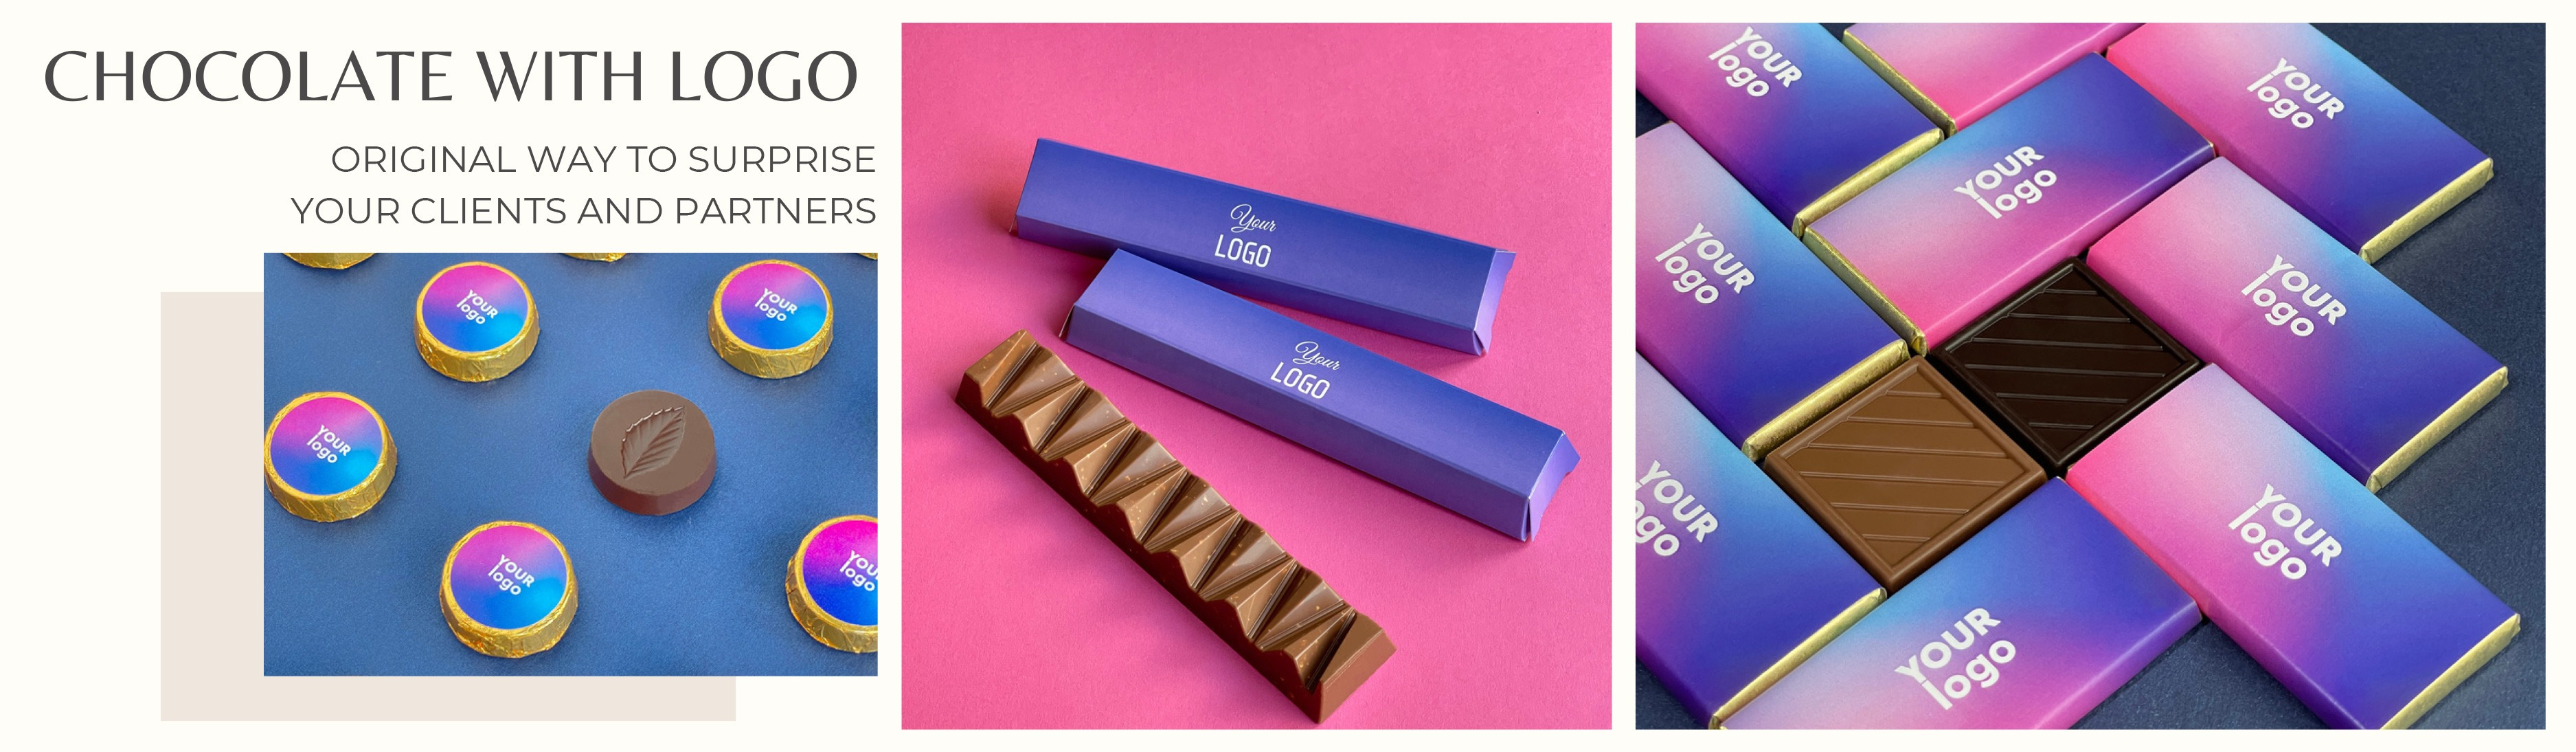 Chocolate with Logo: an Original Way to Surprise Your Clients and Partners